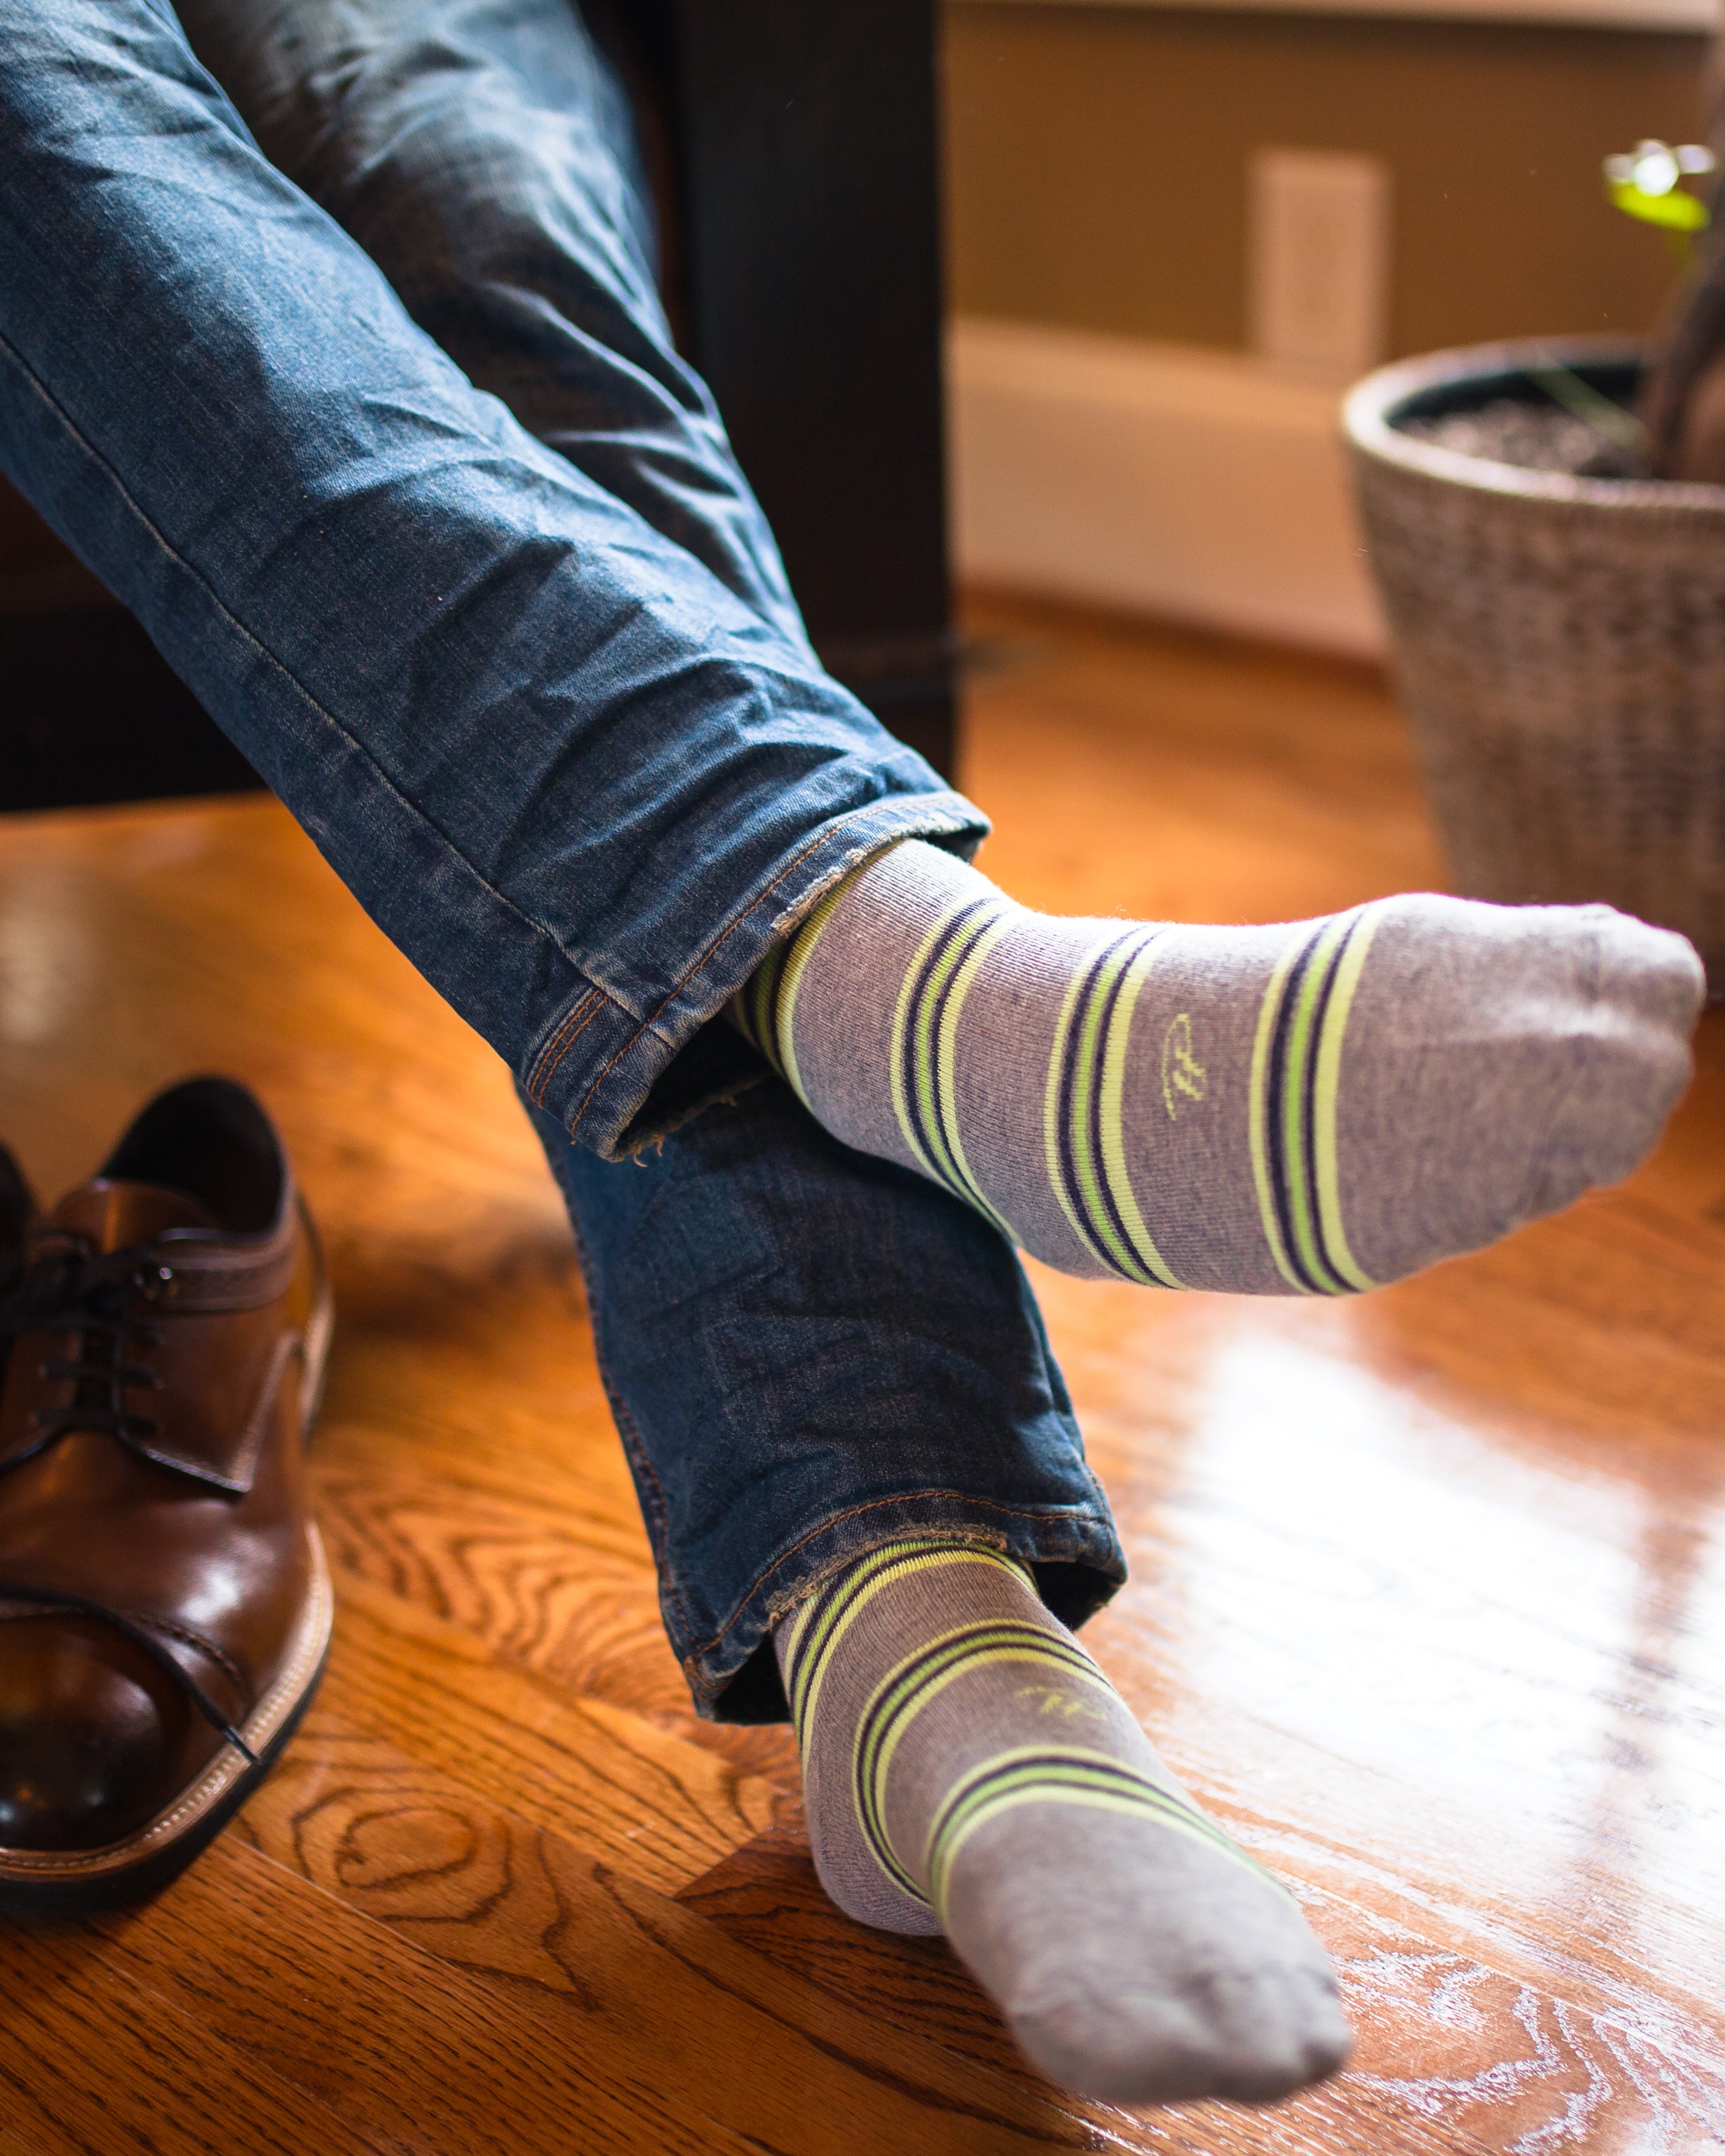 light grey over the calf dress socks with lime green stripes, legs crossed, blue jeans, brown dress shoes on floor